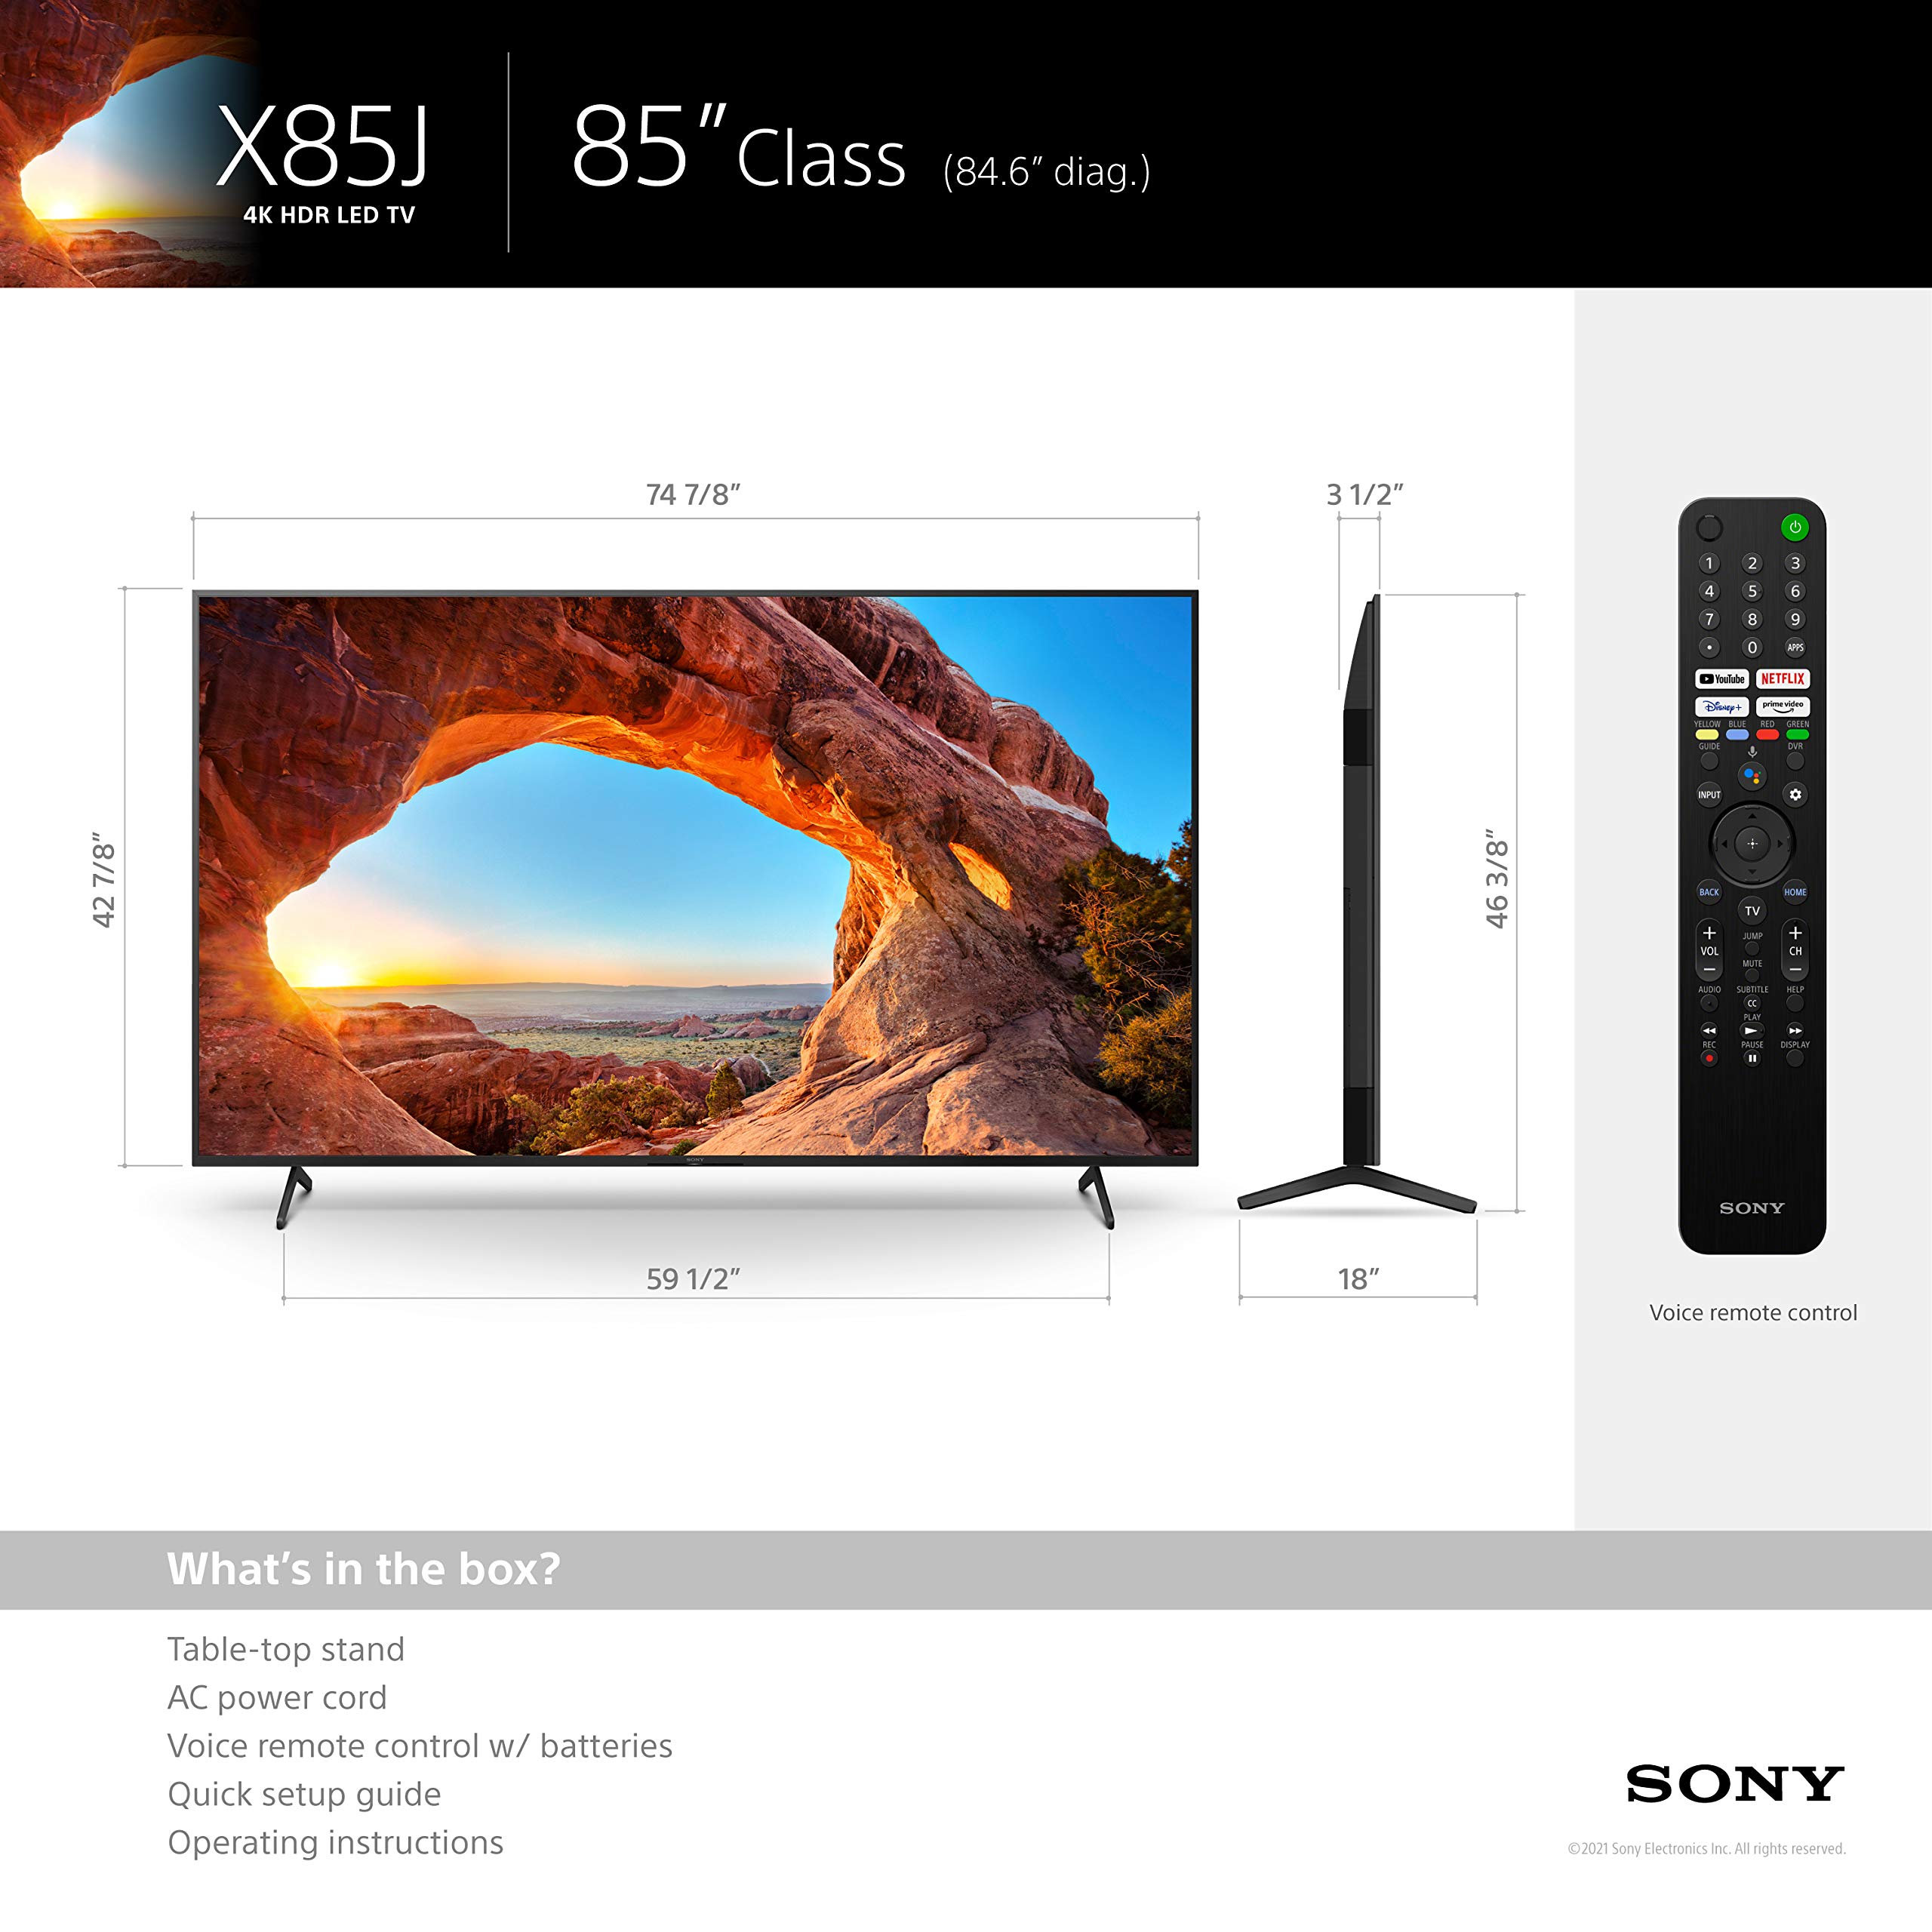 Sony X85J 85 Inch TV: 4K Ultra HD LED Smart Google TV with Native 120HZ Refresh Rate, Dolby Vision HDR, and Alexa Compatibility KD85X85J- 2021 Model , Black